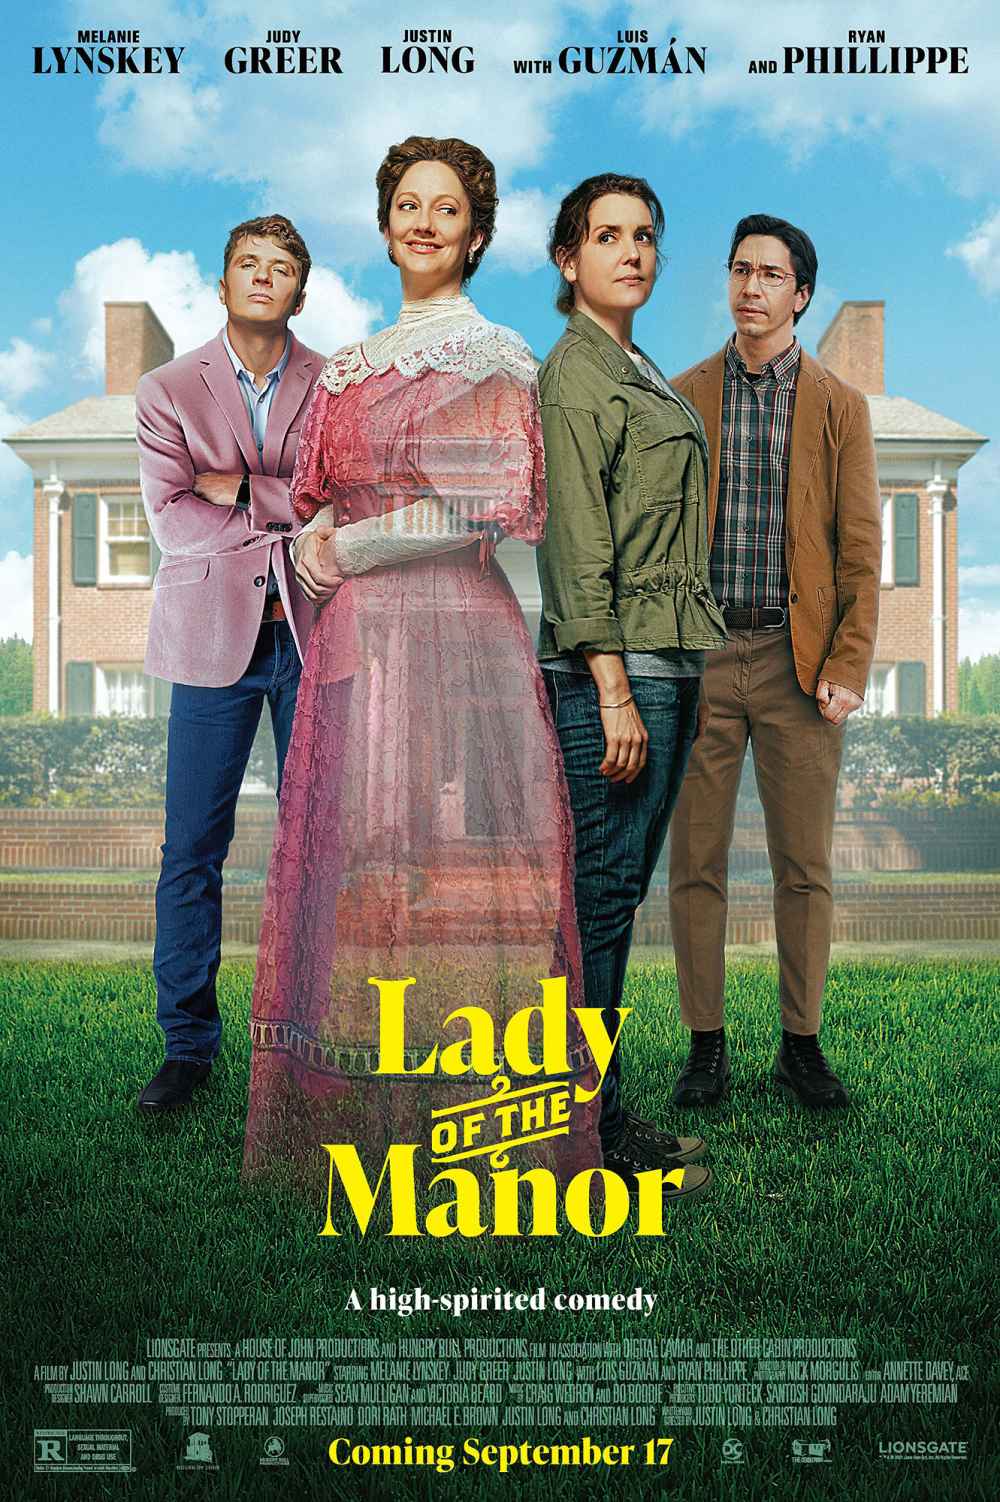 Ryan Phillippe Melanie Lynskey Rave Over Justin Long Directing Debut Lady of the Manor